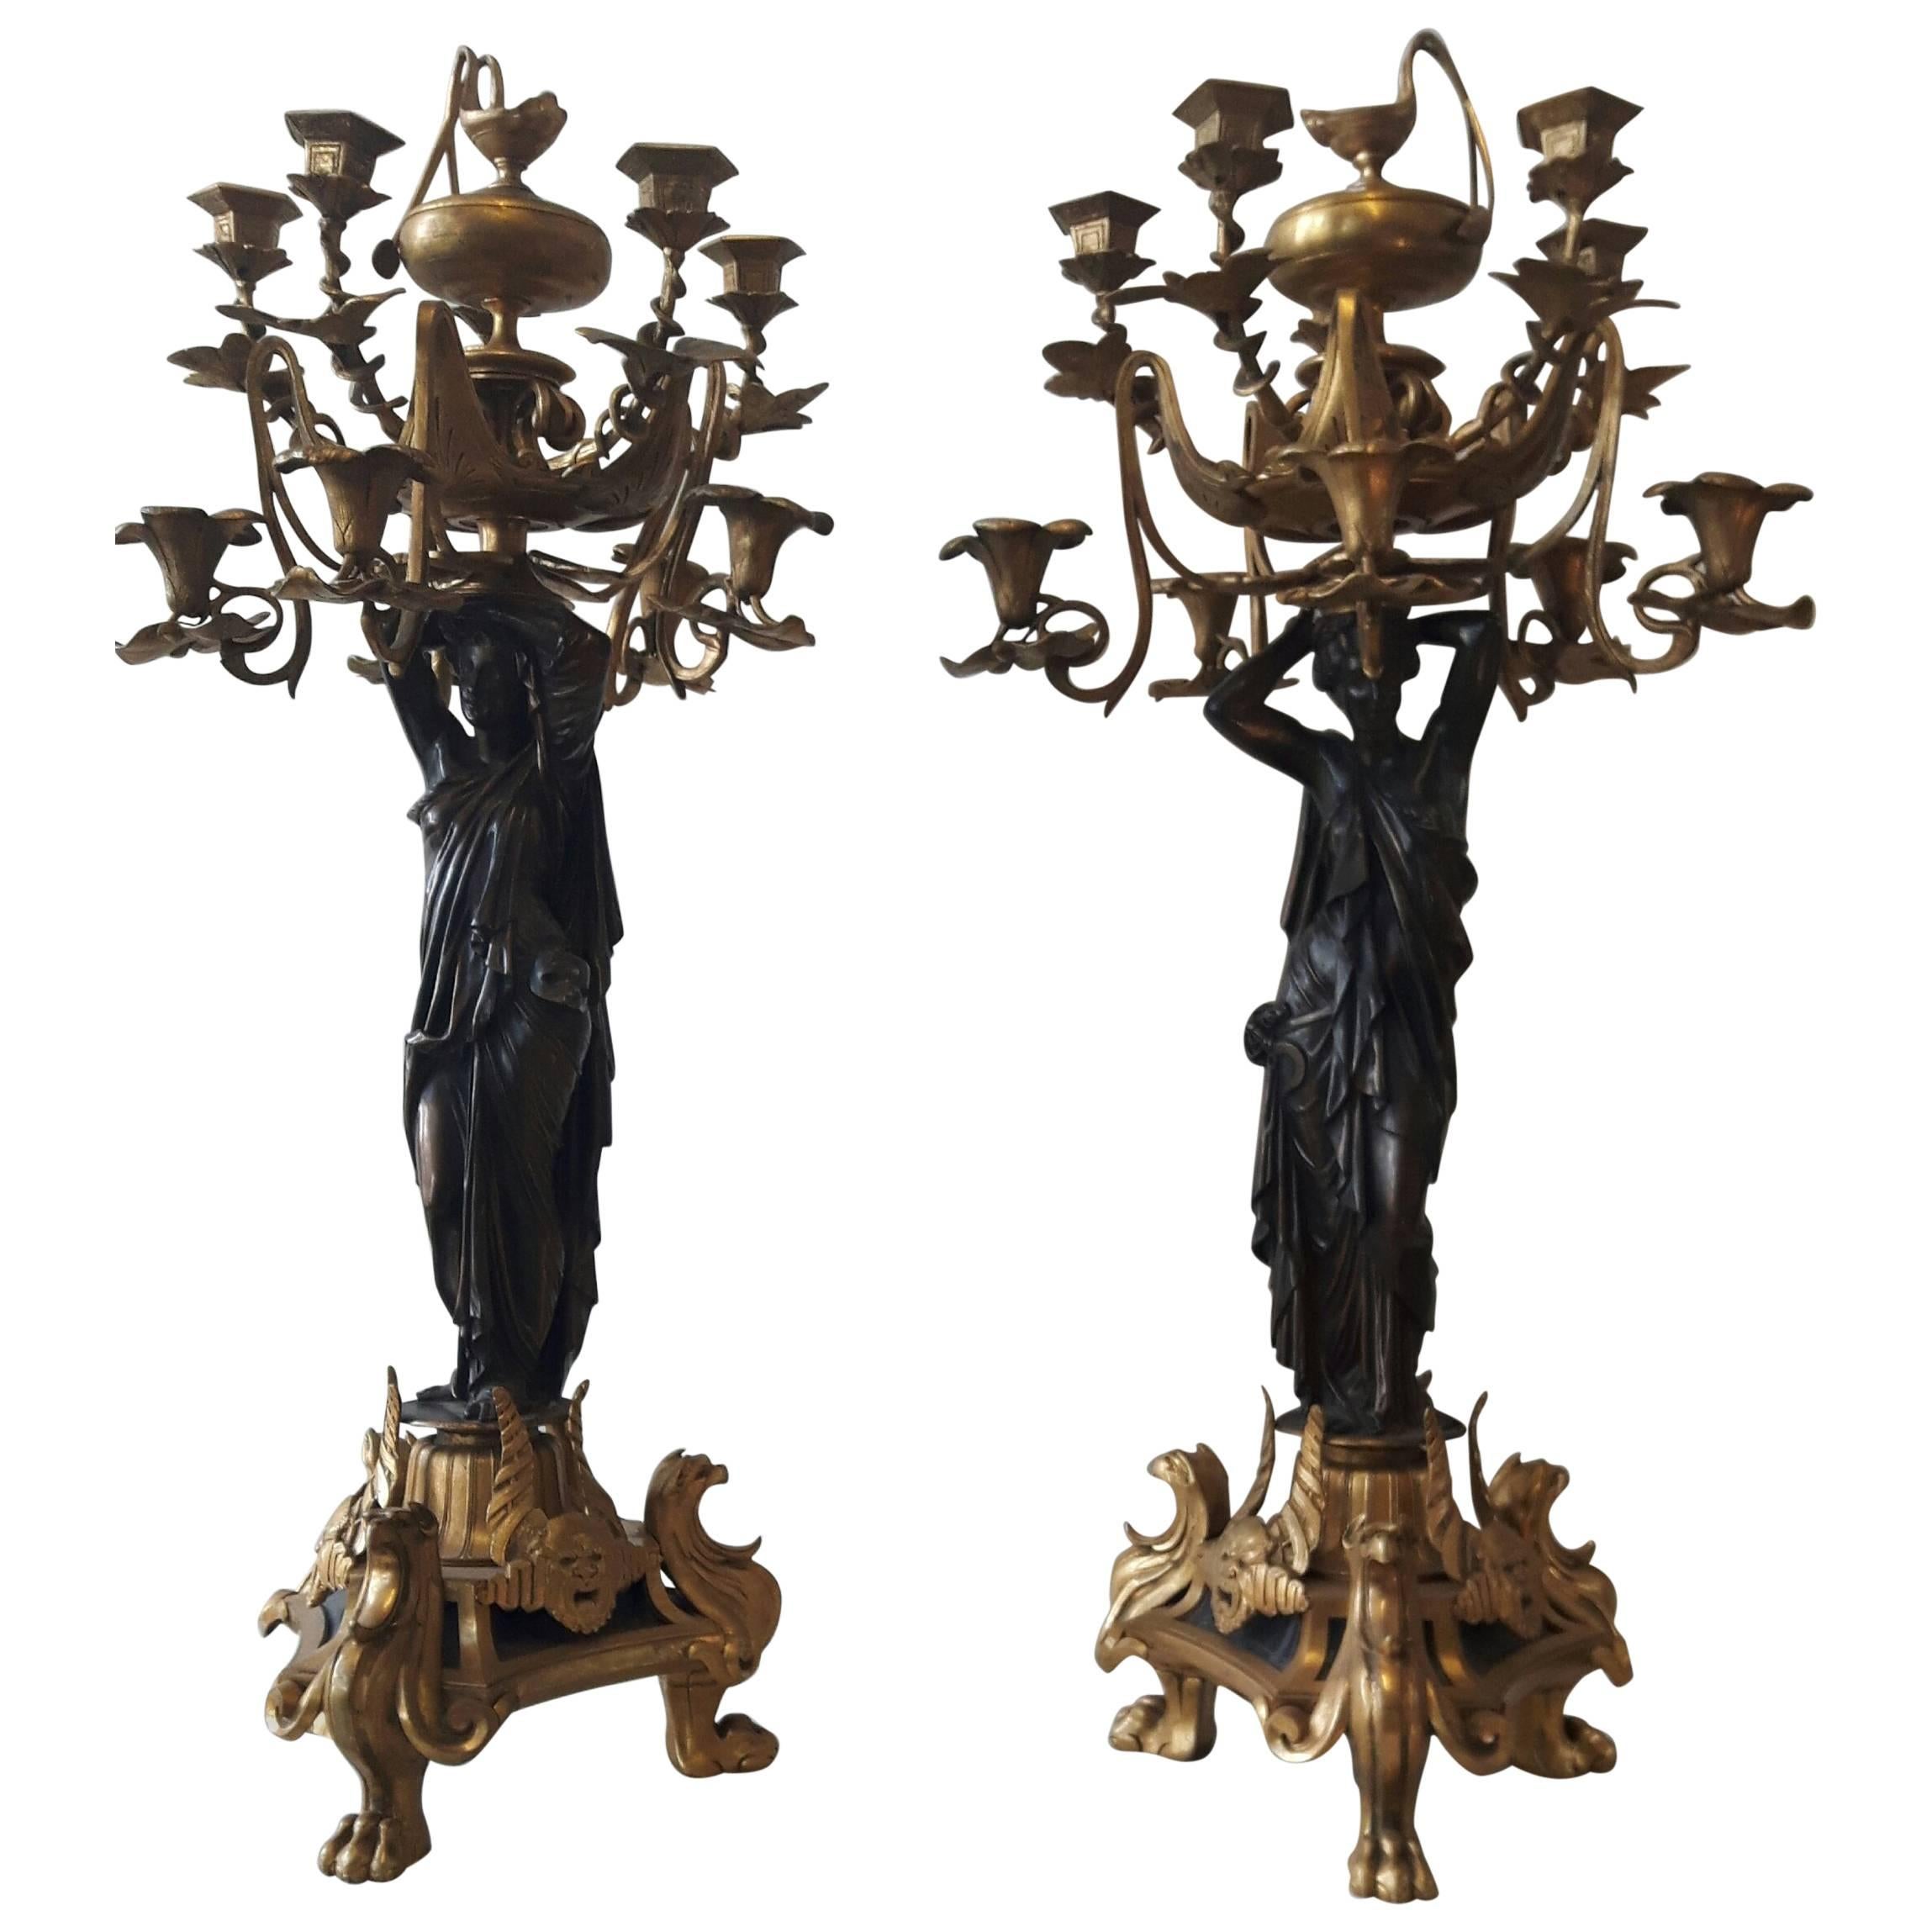 Unusual Pair of 19th Century French Candelabras